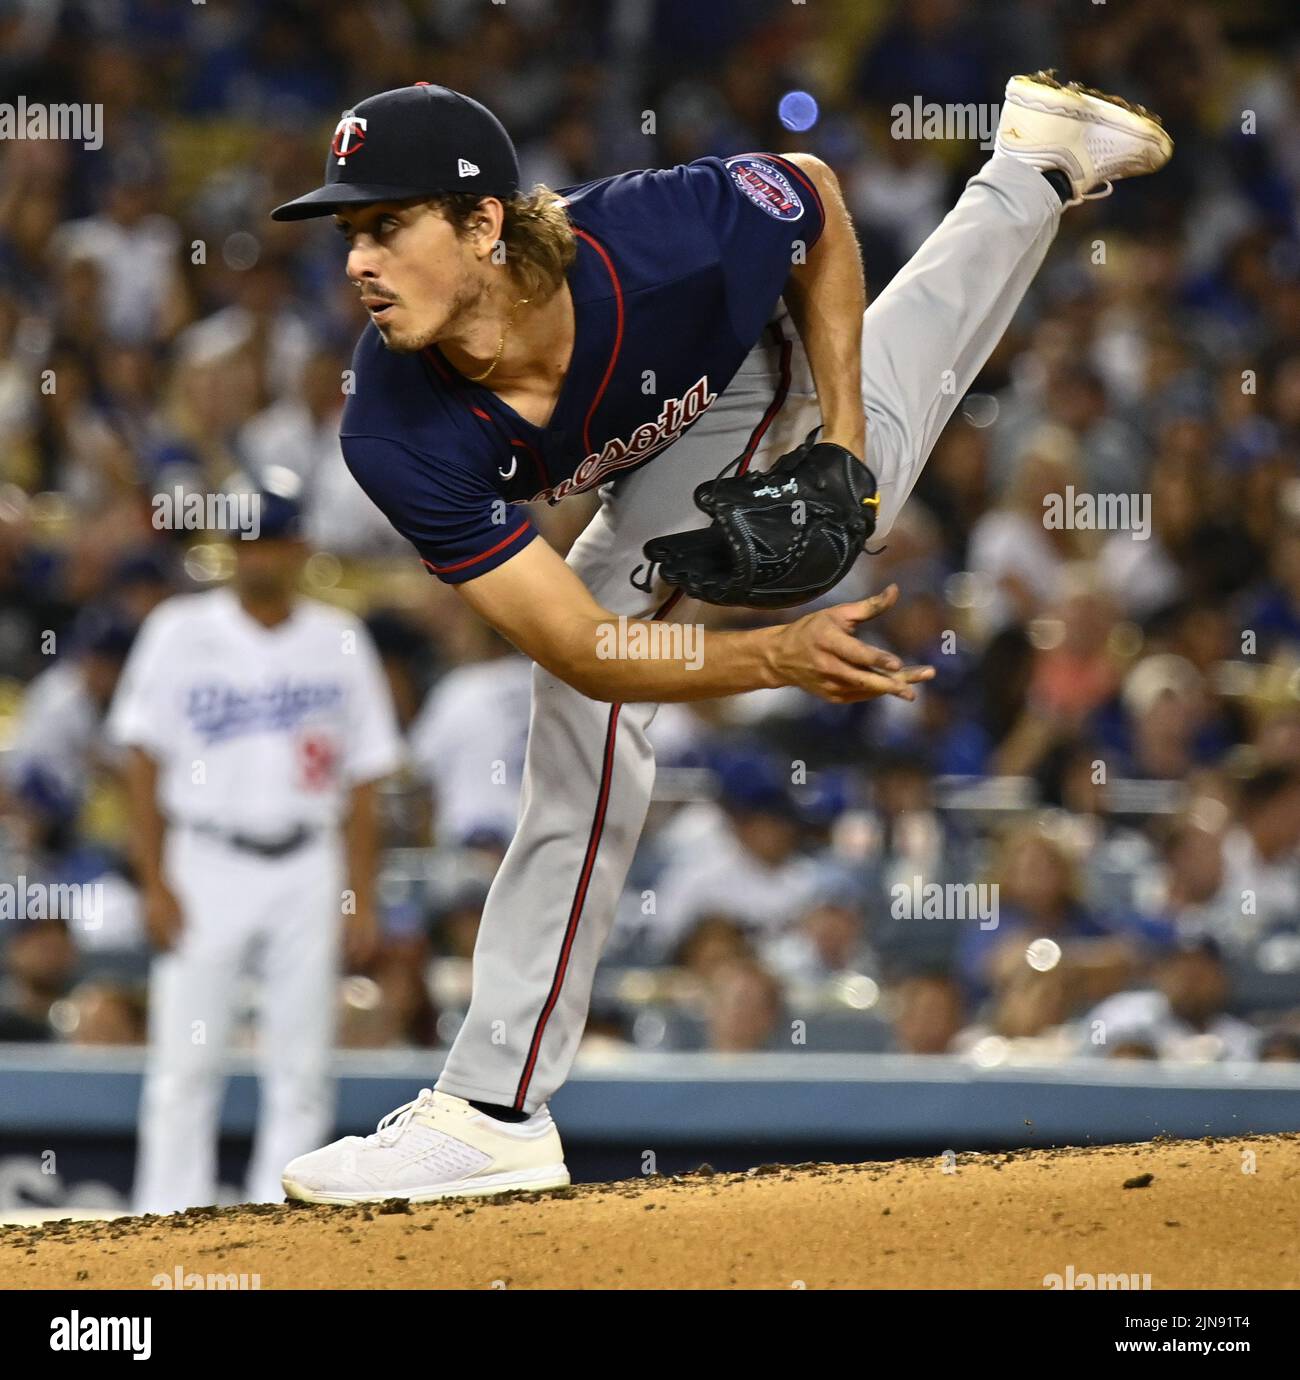 Los Angeles, United States. 10th Aug, 2022. Minnesota Twins starting pitcher Joe Ryan delivers against the Los Angeles Dodgers during the third inning at Dodger Stadium on Tuesday, August 9, 2022. The Dodgers defeated the Twins 10-3 for their ninth consecutive win. Photo by Jim Ruymen/UPI Credit: UPI/Alamy Live News Stock Photo